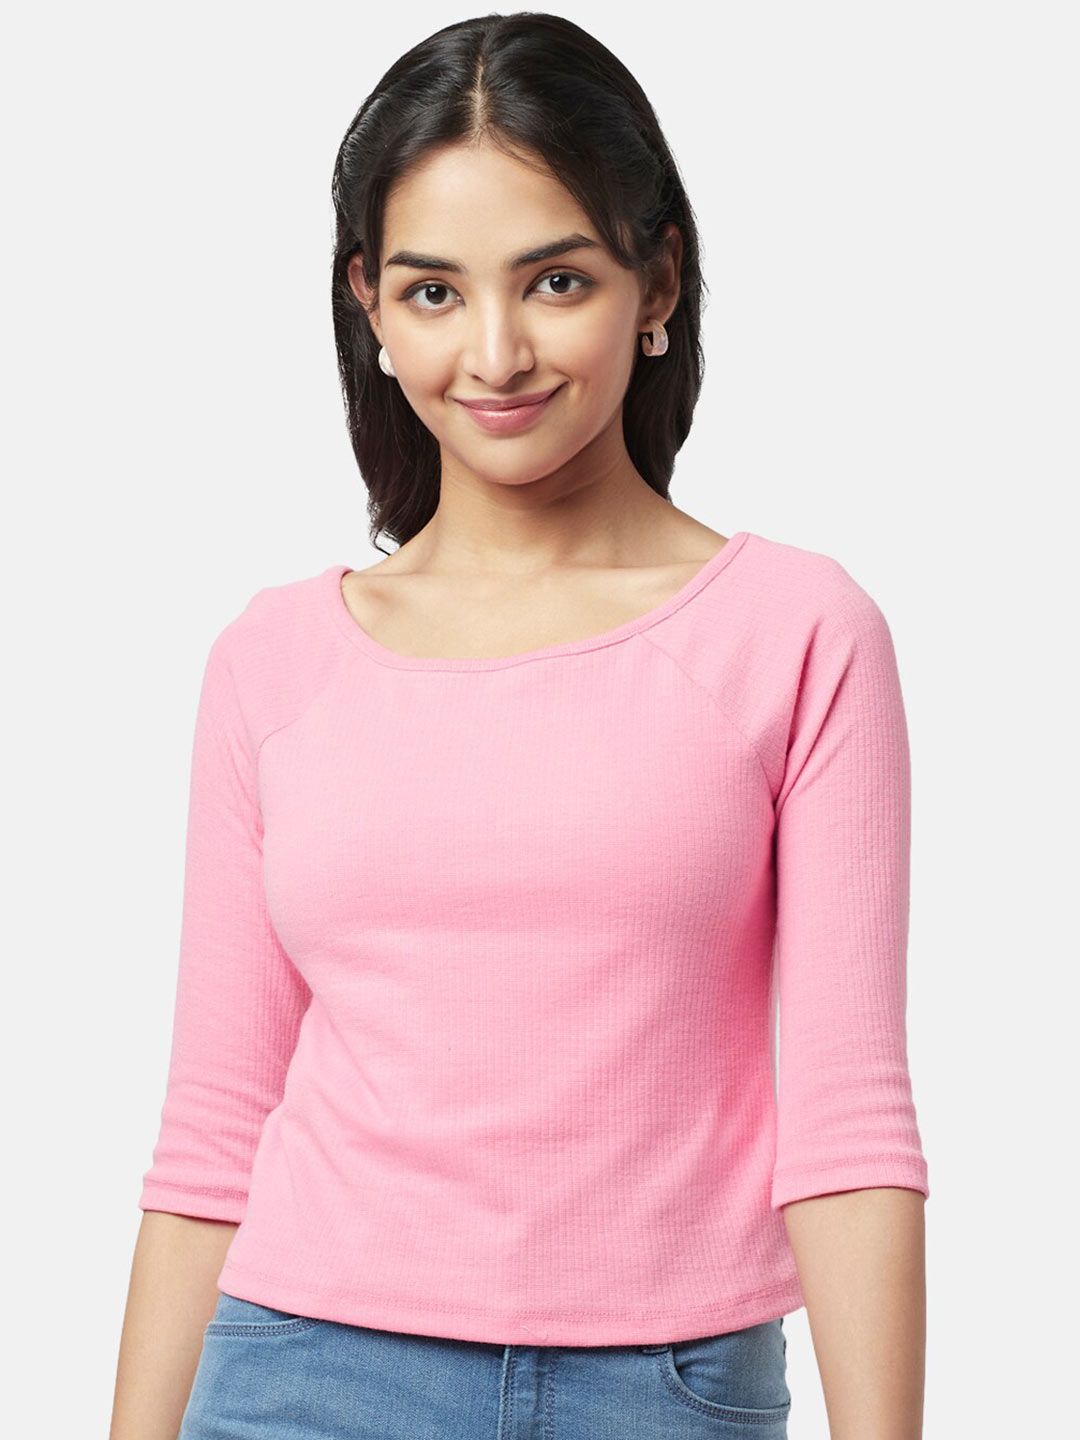 YU by Pantaloons Polyester Round Neck Top Price in India